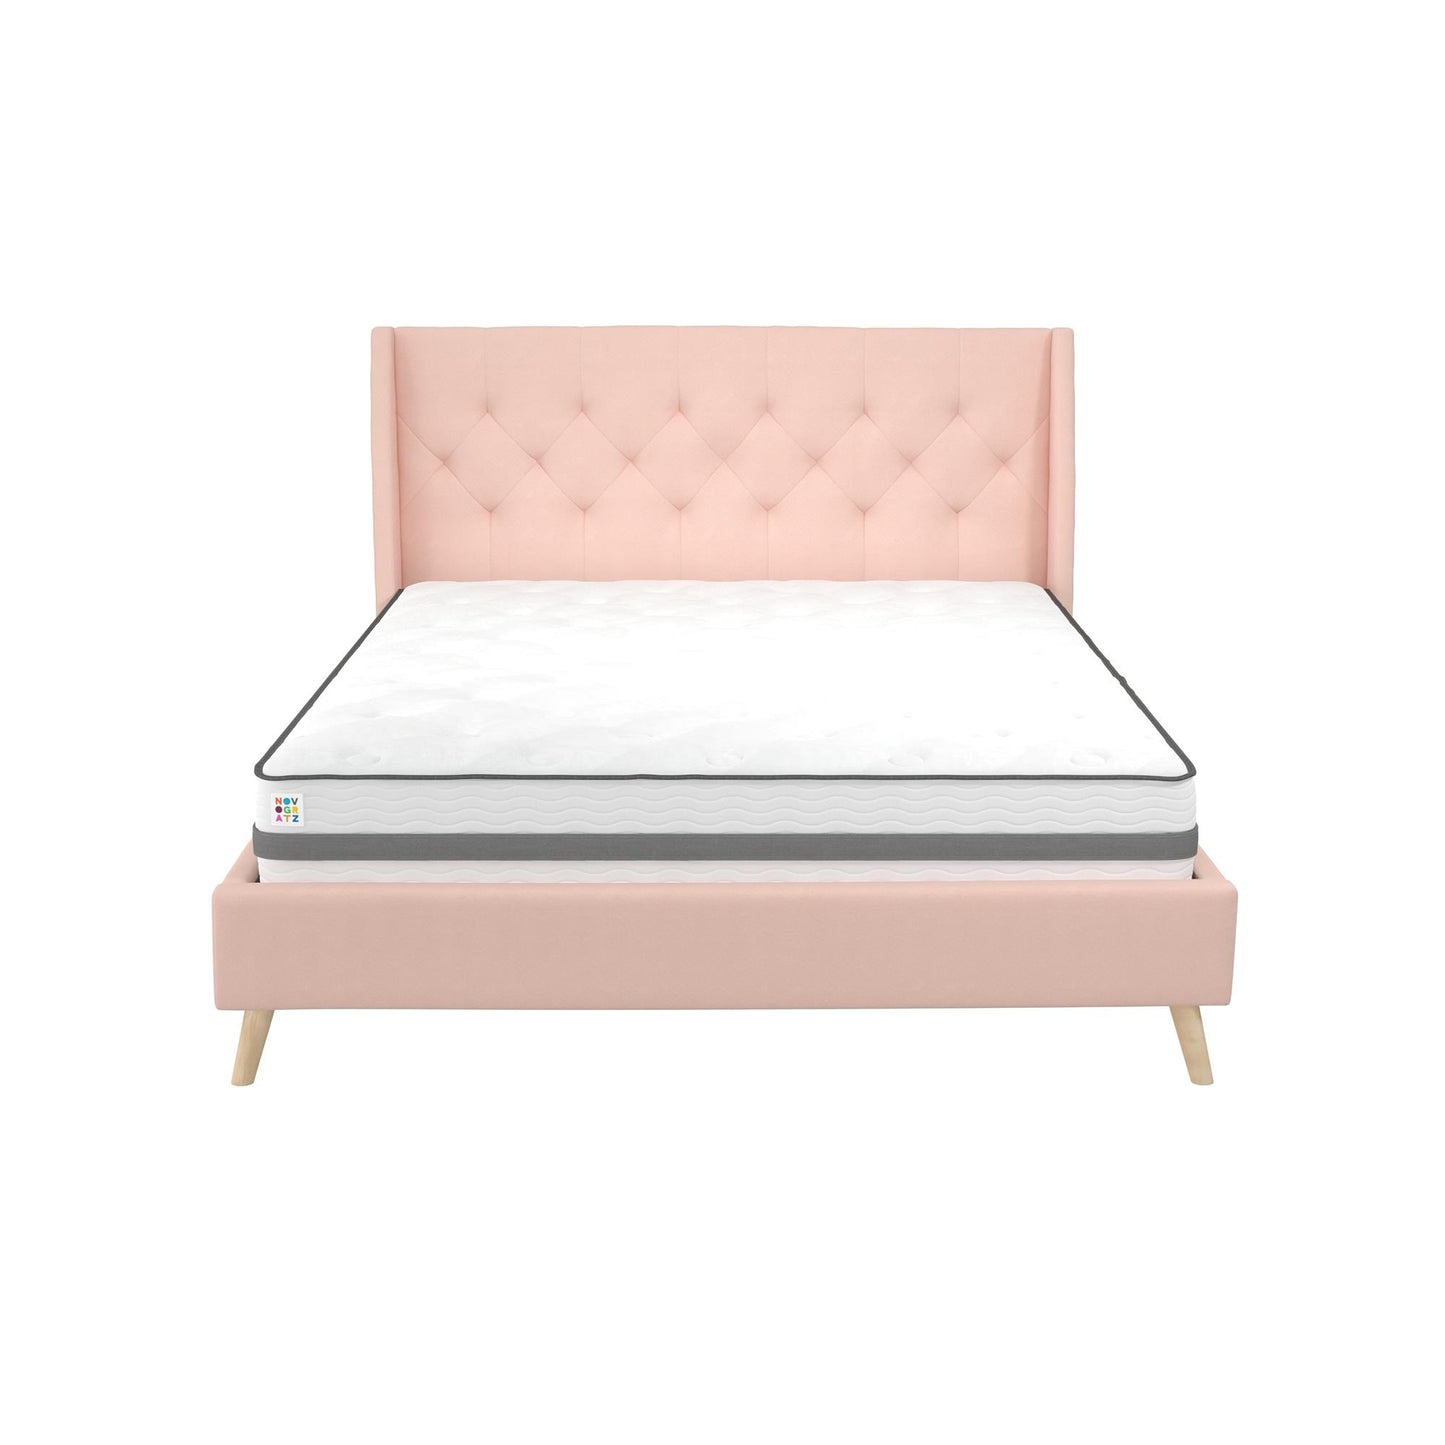 Her Majesty Bed - Pink - Full